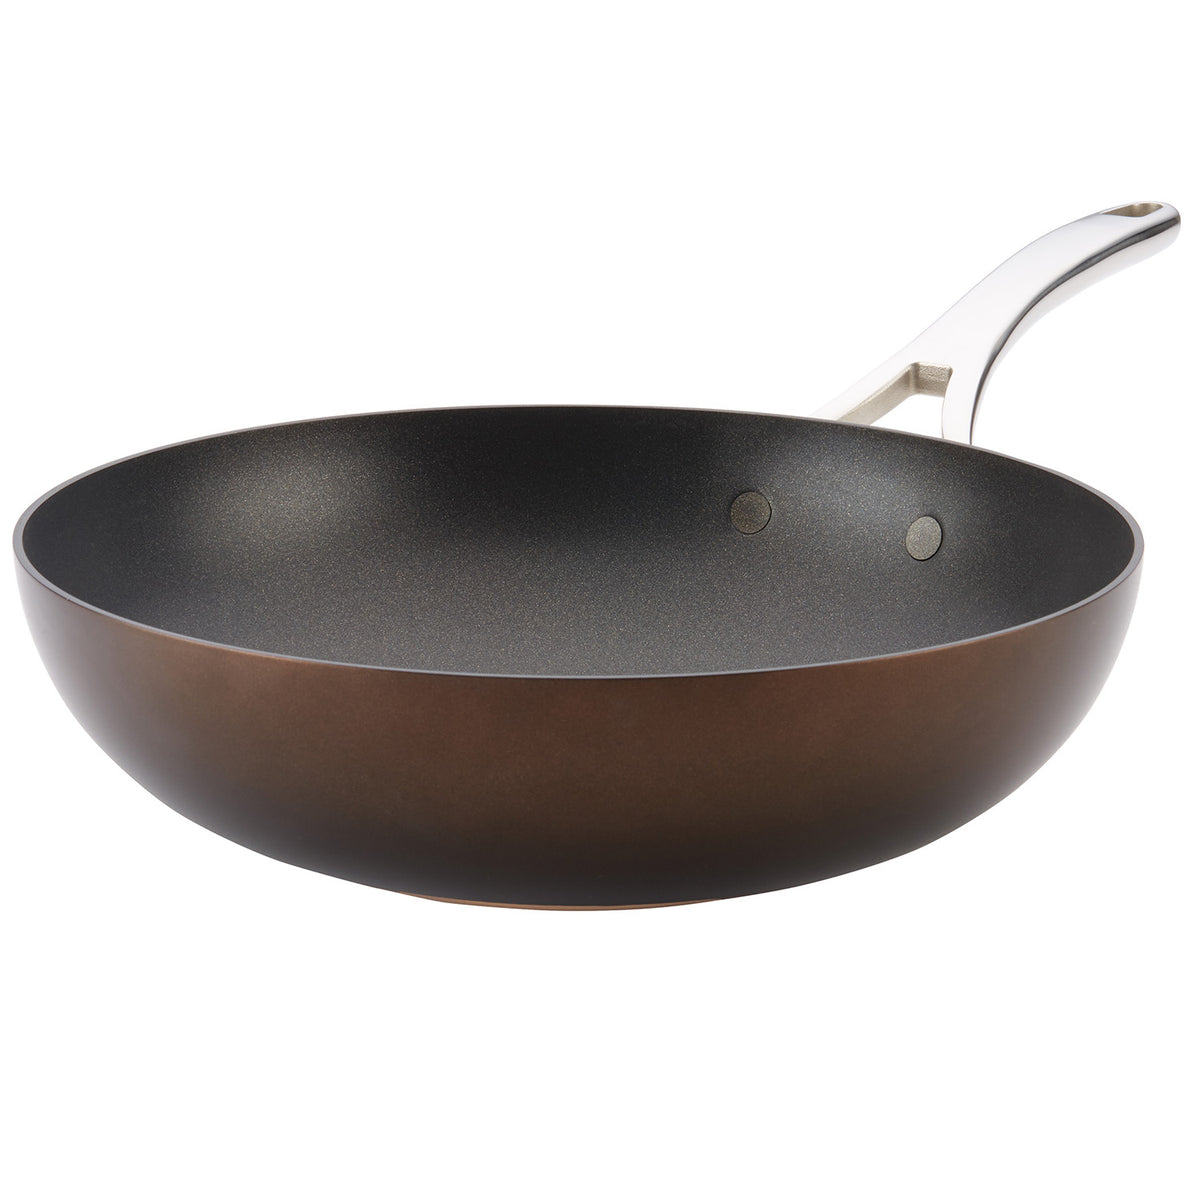 Anolon Advanced Home 12 Covered Ultimate Pan Onyx